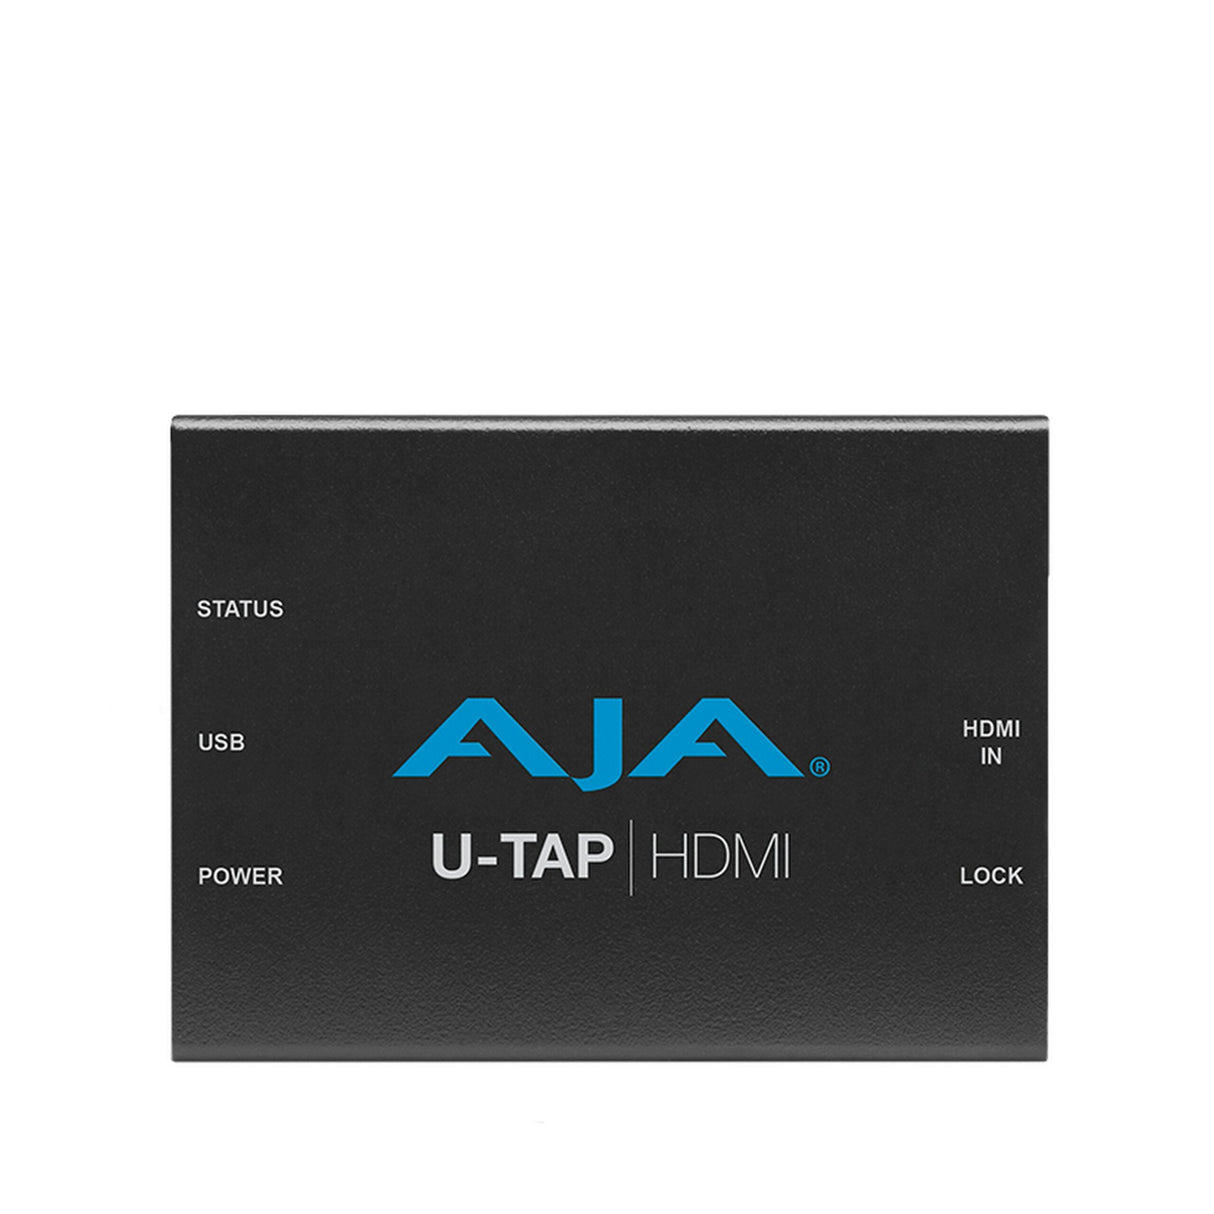 AJA U-TAP-HDMI HD/SD USB 3.0 Capture Device for Mac/Windows/Linux with (Used)